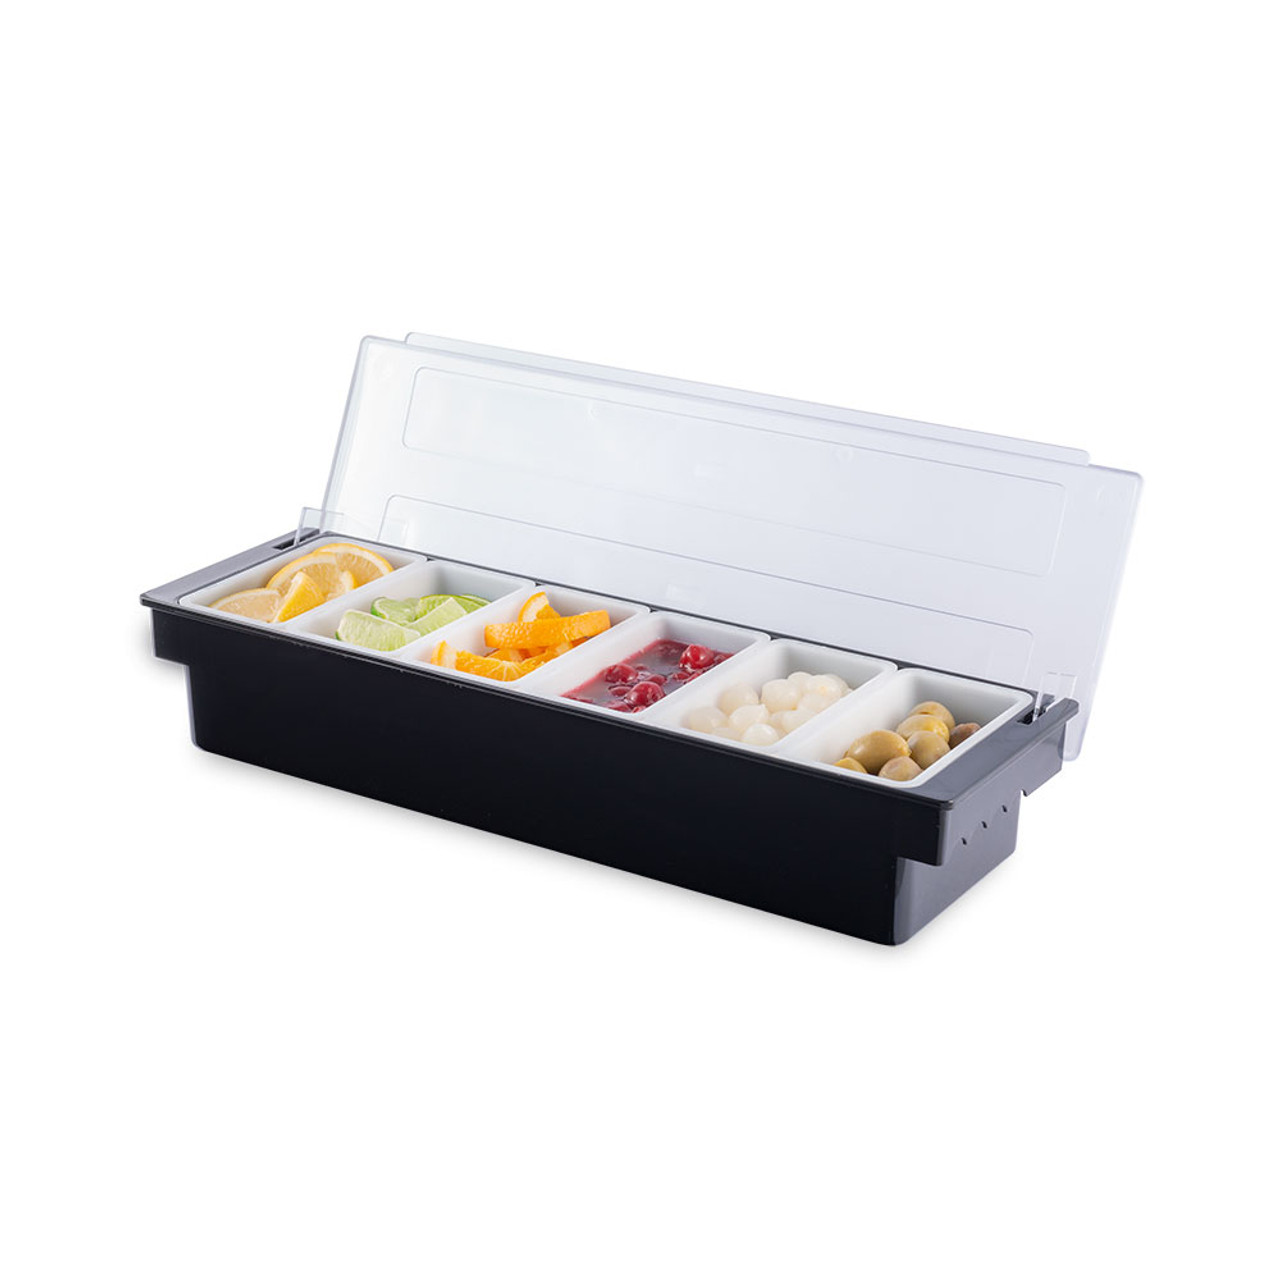 https://cdn11.bigcommerce.com/s-cznxq08r7/images/stencil/1280x1280/products/1505/4970/cch-6-bar-garnish-tray-with-lid-plastic-6-compartments-2__24410.1590769626.jpg?c=1